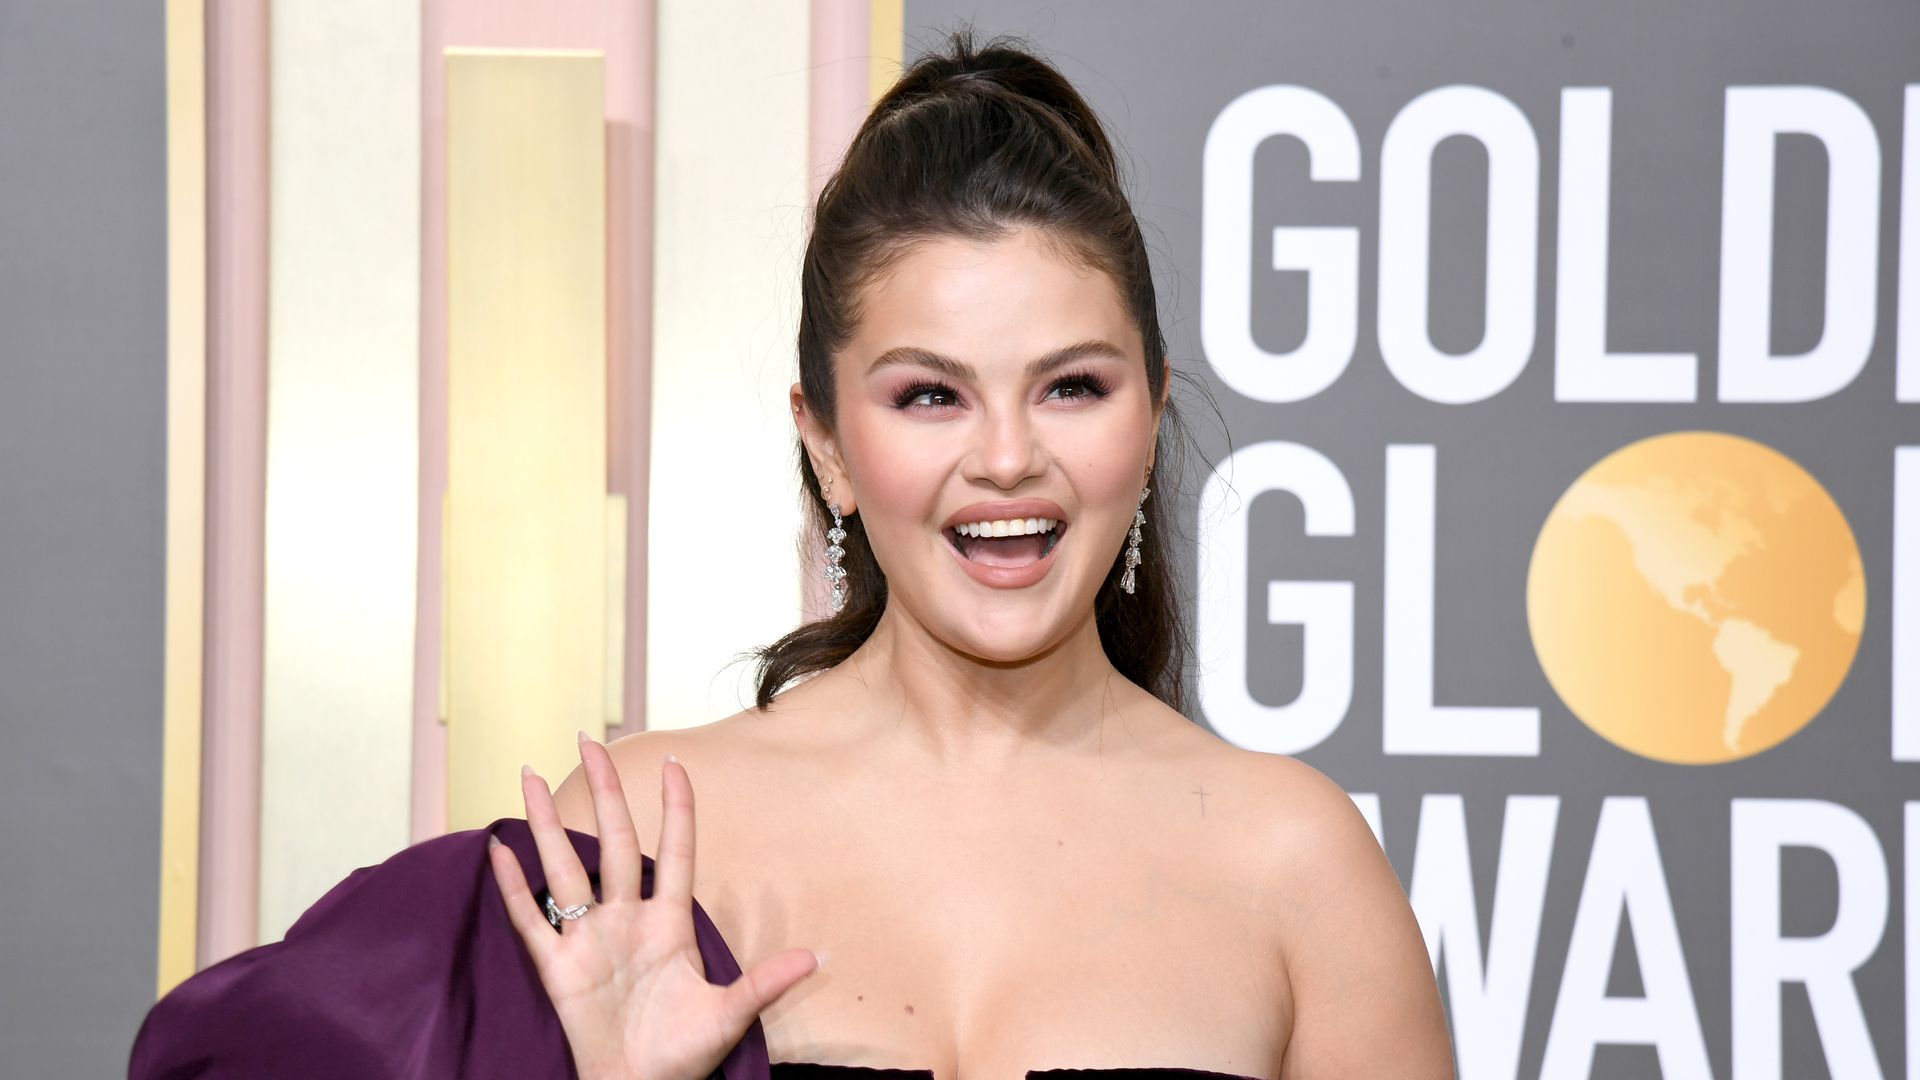 Selena Gomez attends the 80th Annual Golden Globe Awards at The Beverly Hilton on January 10, 2023 in Beverly Hills, California. (Photo by Jon Kopaloff/Getty Images)